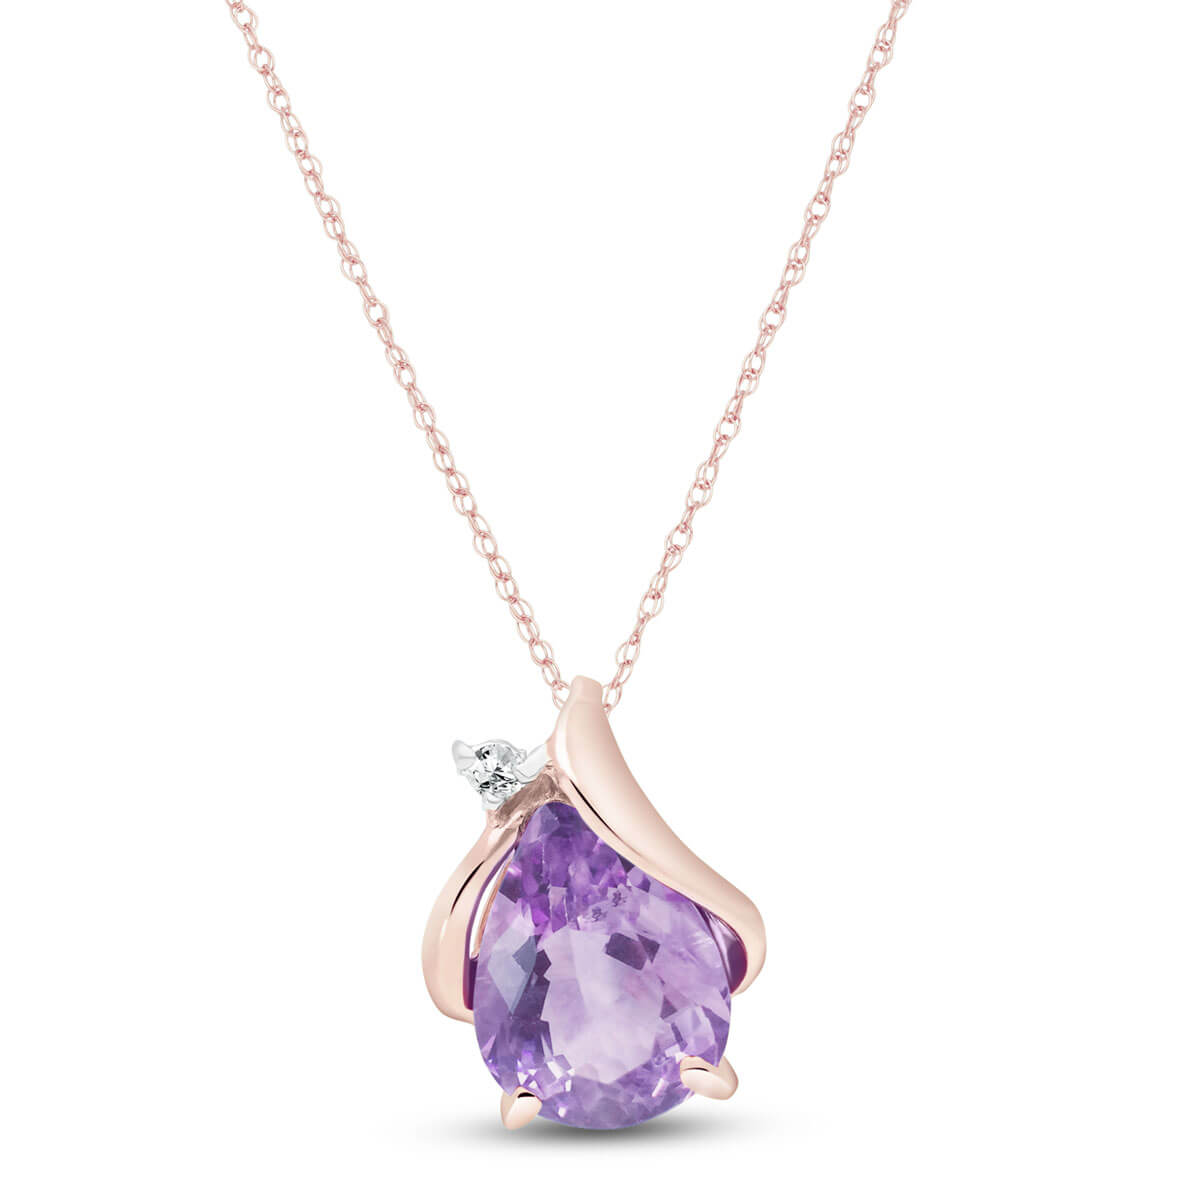 Pear Cut Amethyst Pendant Necklace 1.53 ctw in 9ct Rose Gold